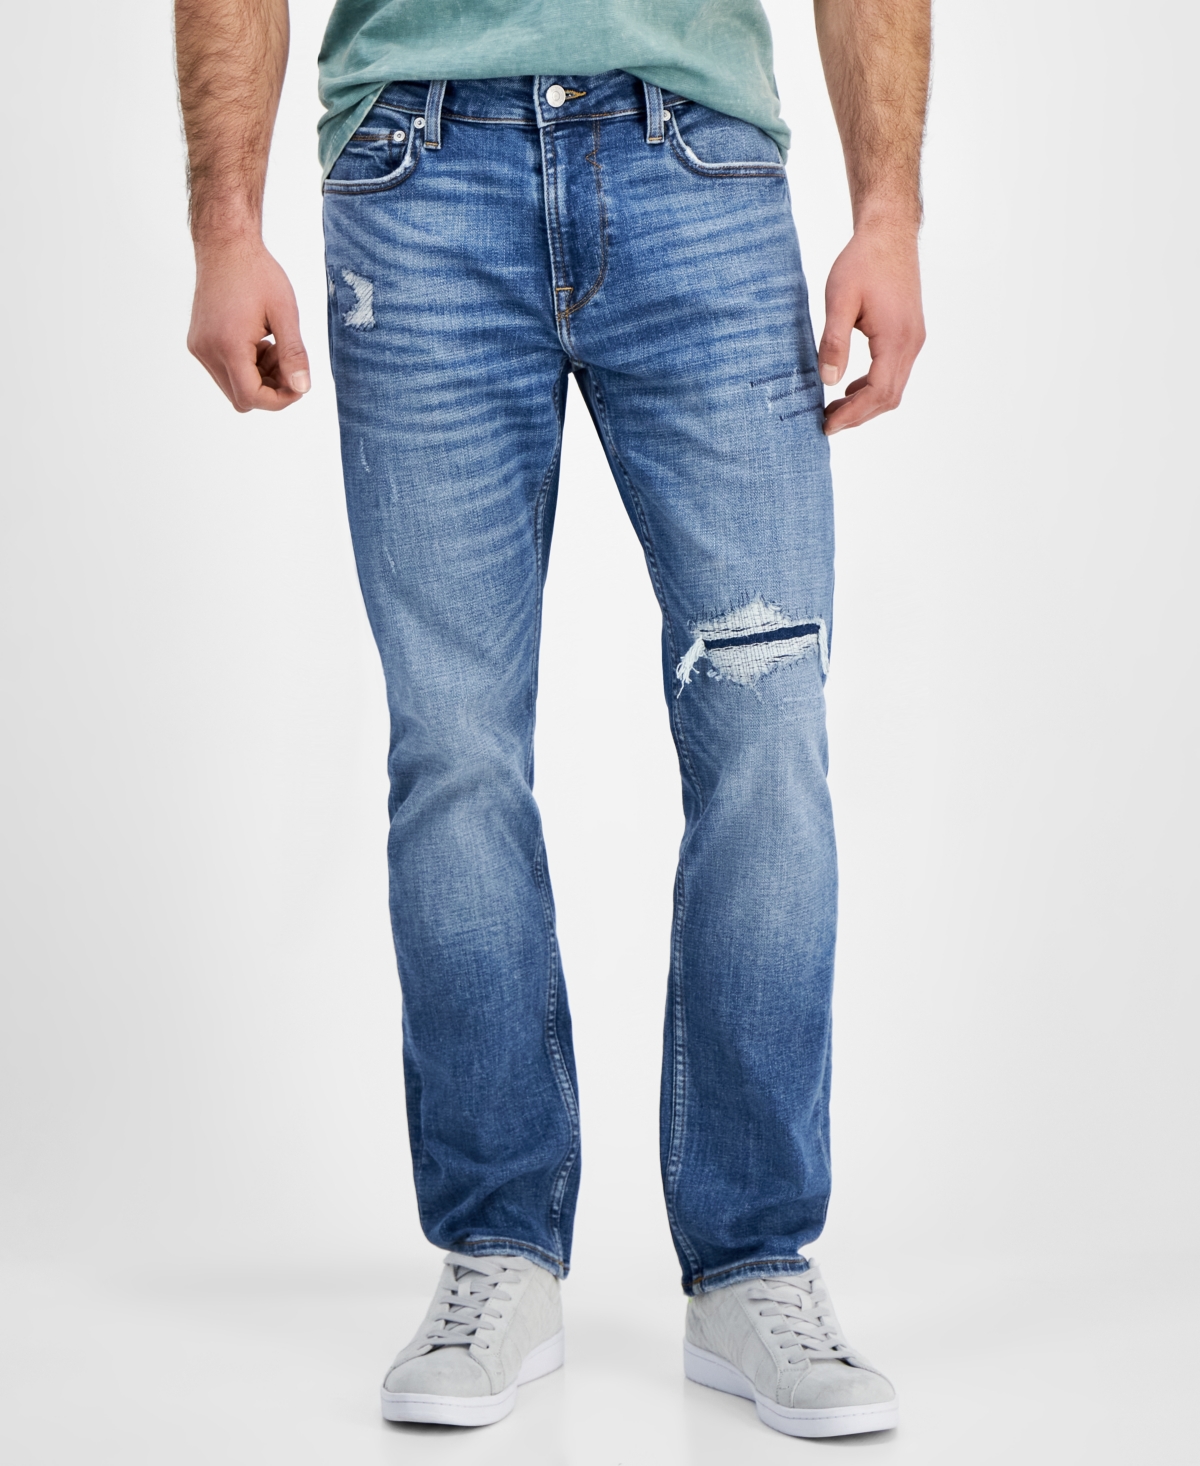 GUESS MEN'S REGULAR-STRAIGHT FIT DESTROYED JEANS